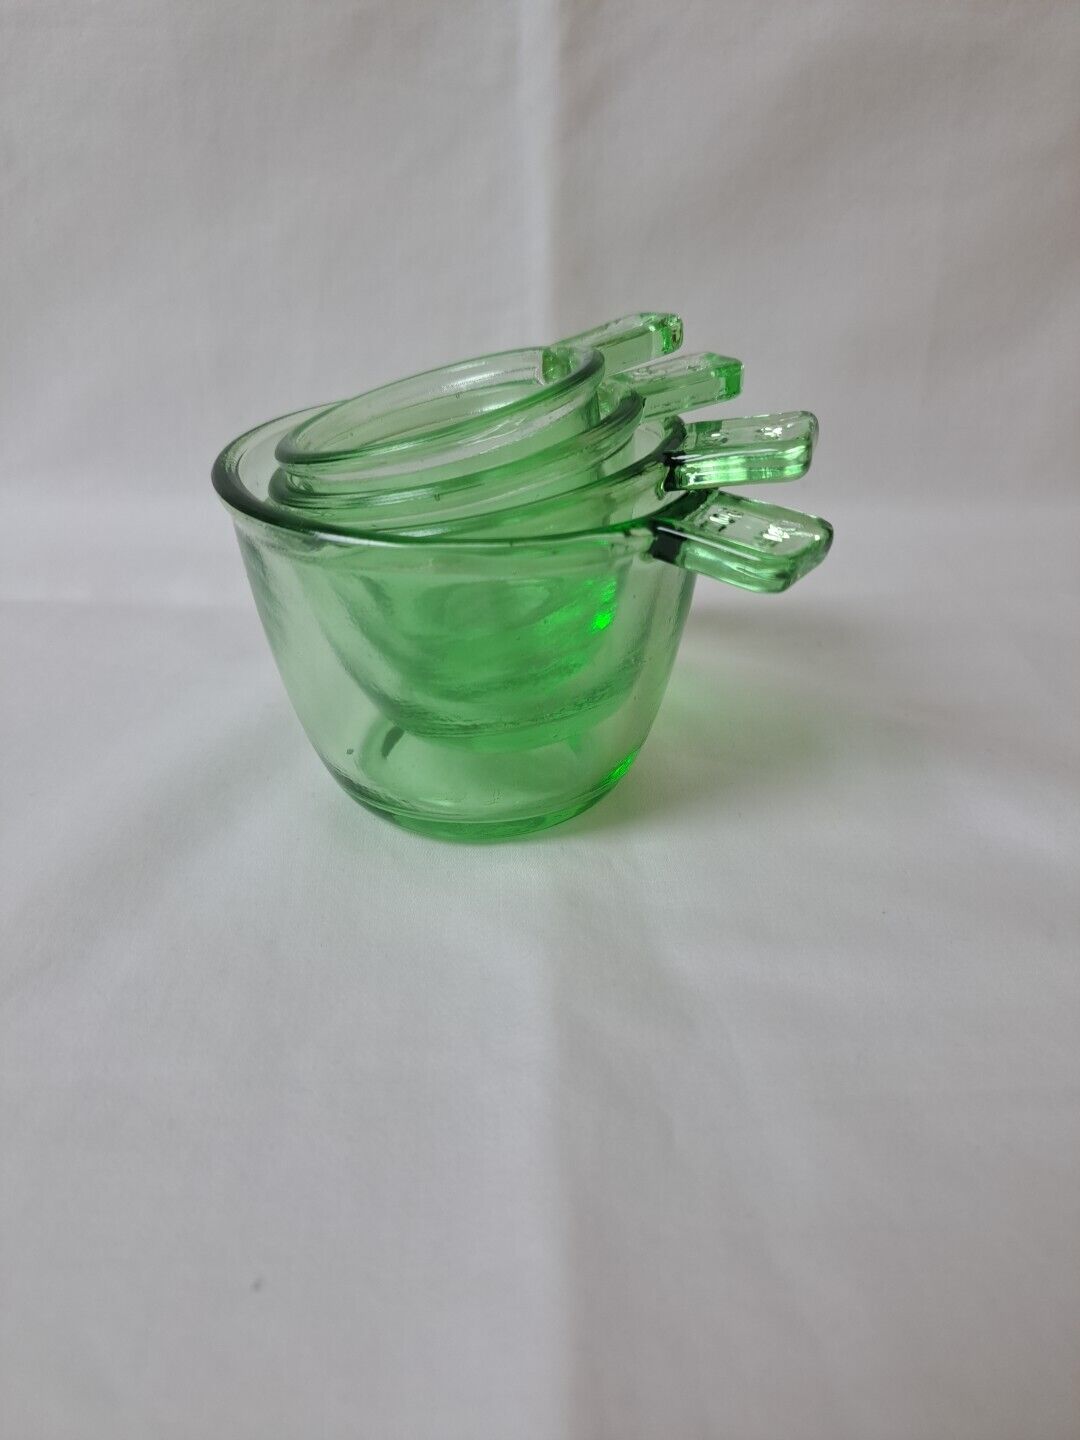 GREEN DEPRESSION STYLE GLASS 4 PC NESTING MEASURING CUP SET 